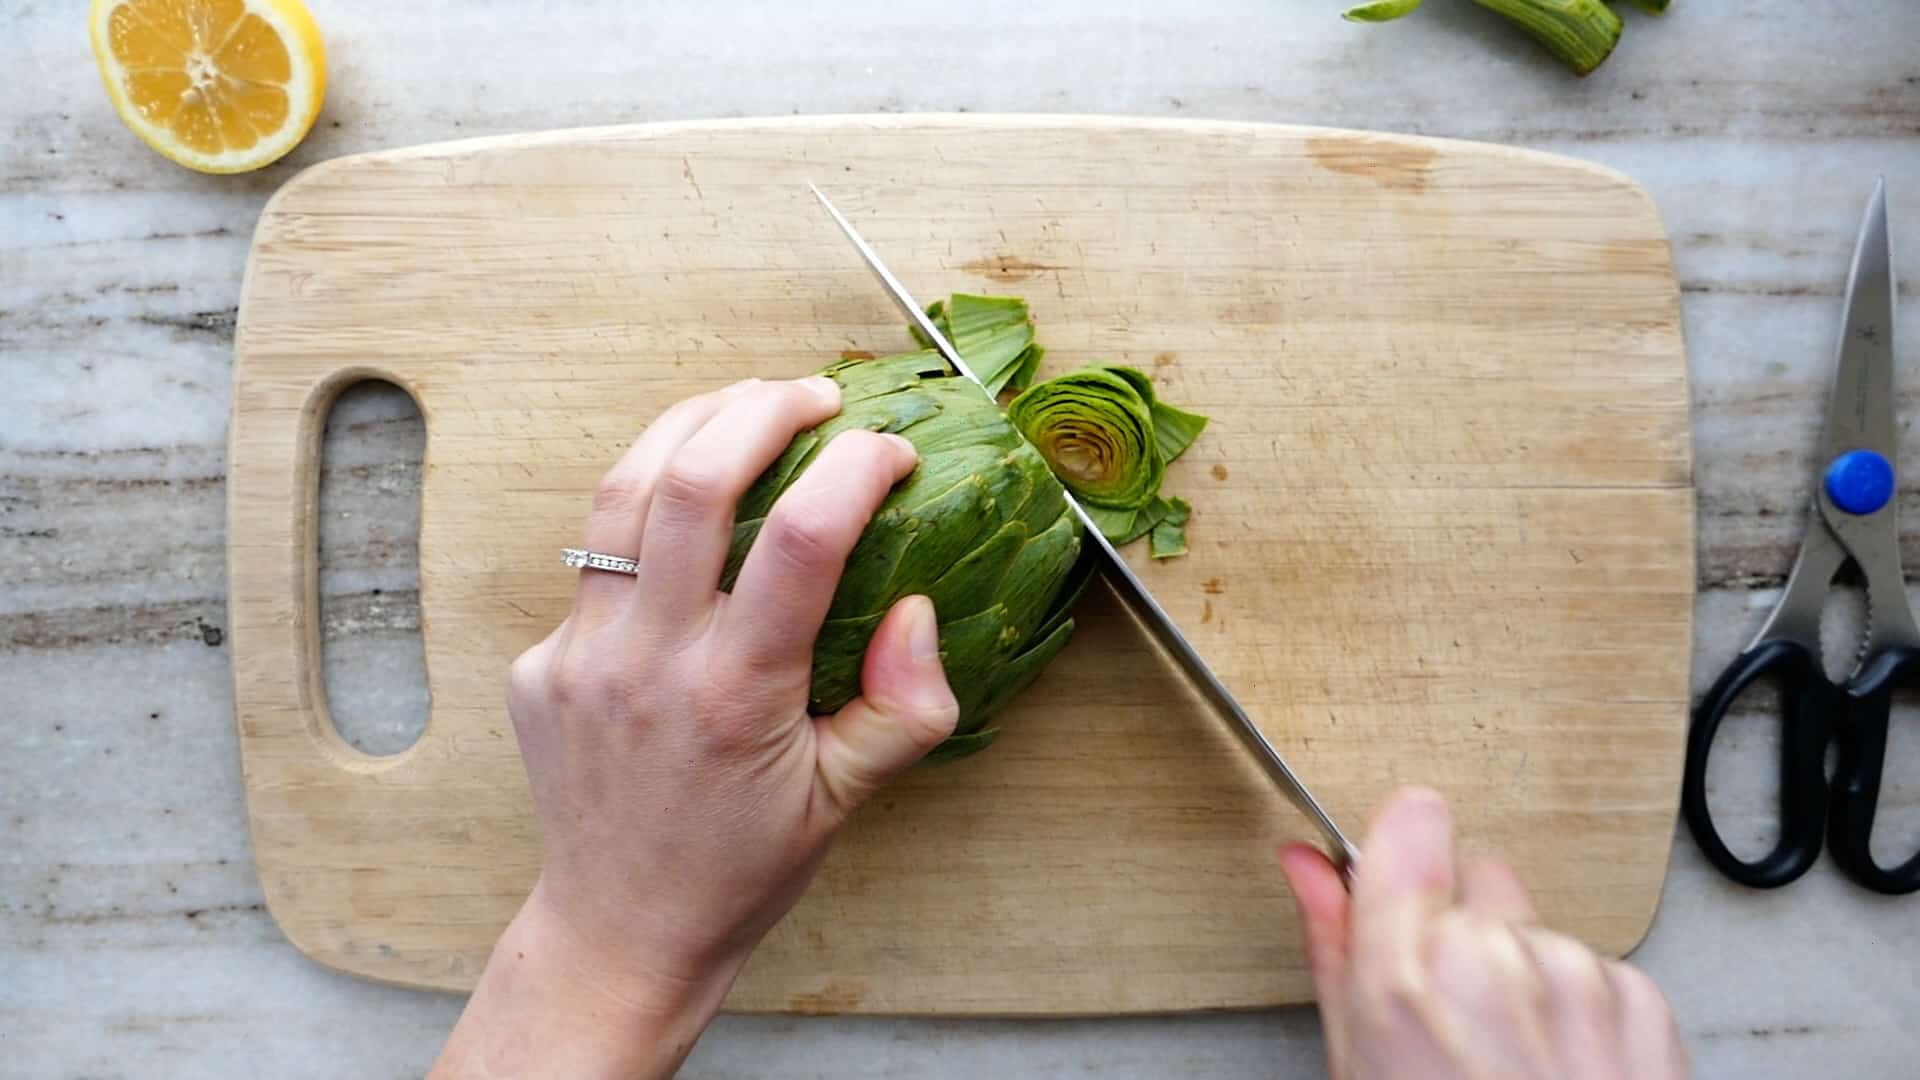 woman slicing off the top of an artichoke over a cutting board